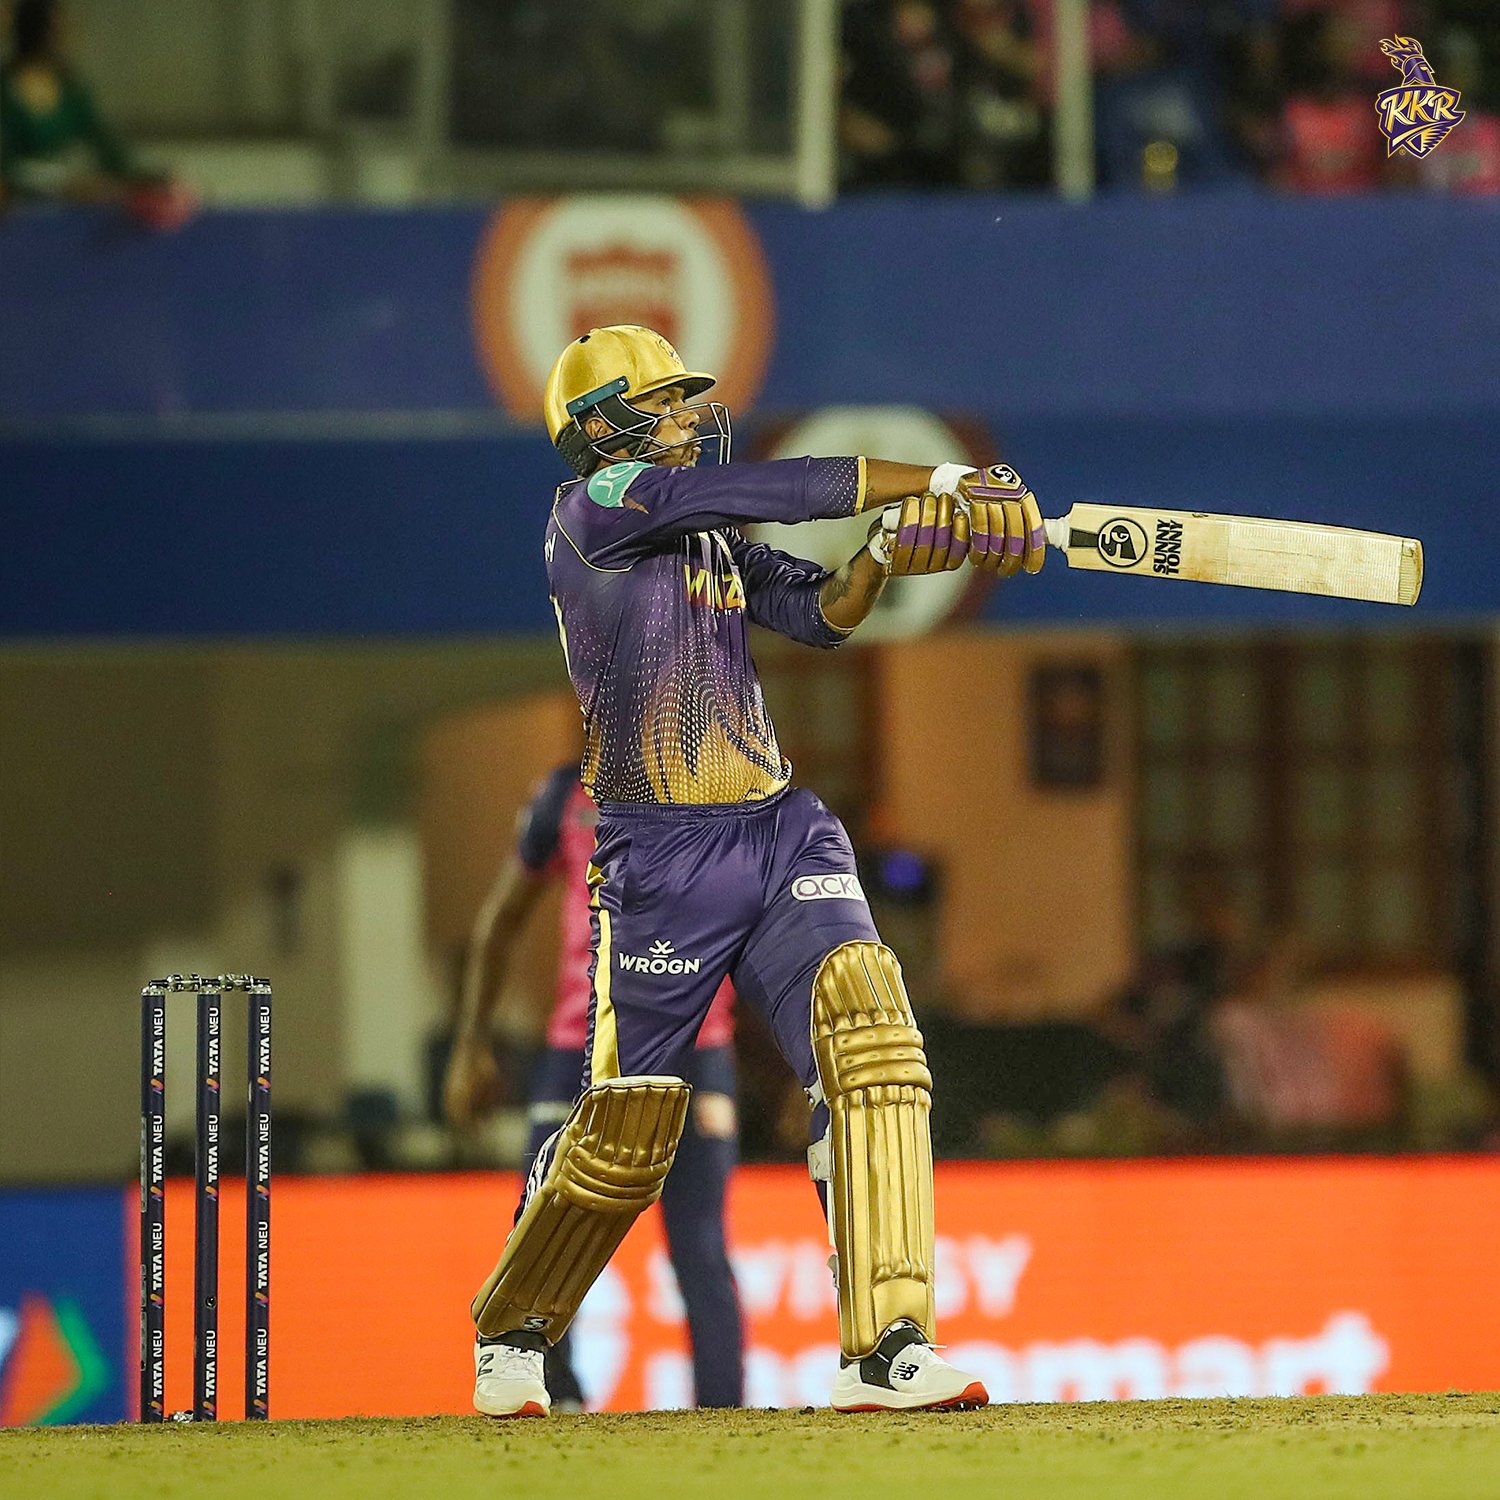 Rajasthan Royals defeated Kolkata Knight Riders by 7 runs thanks to Buttler's century and Chahal's Hatrick